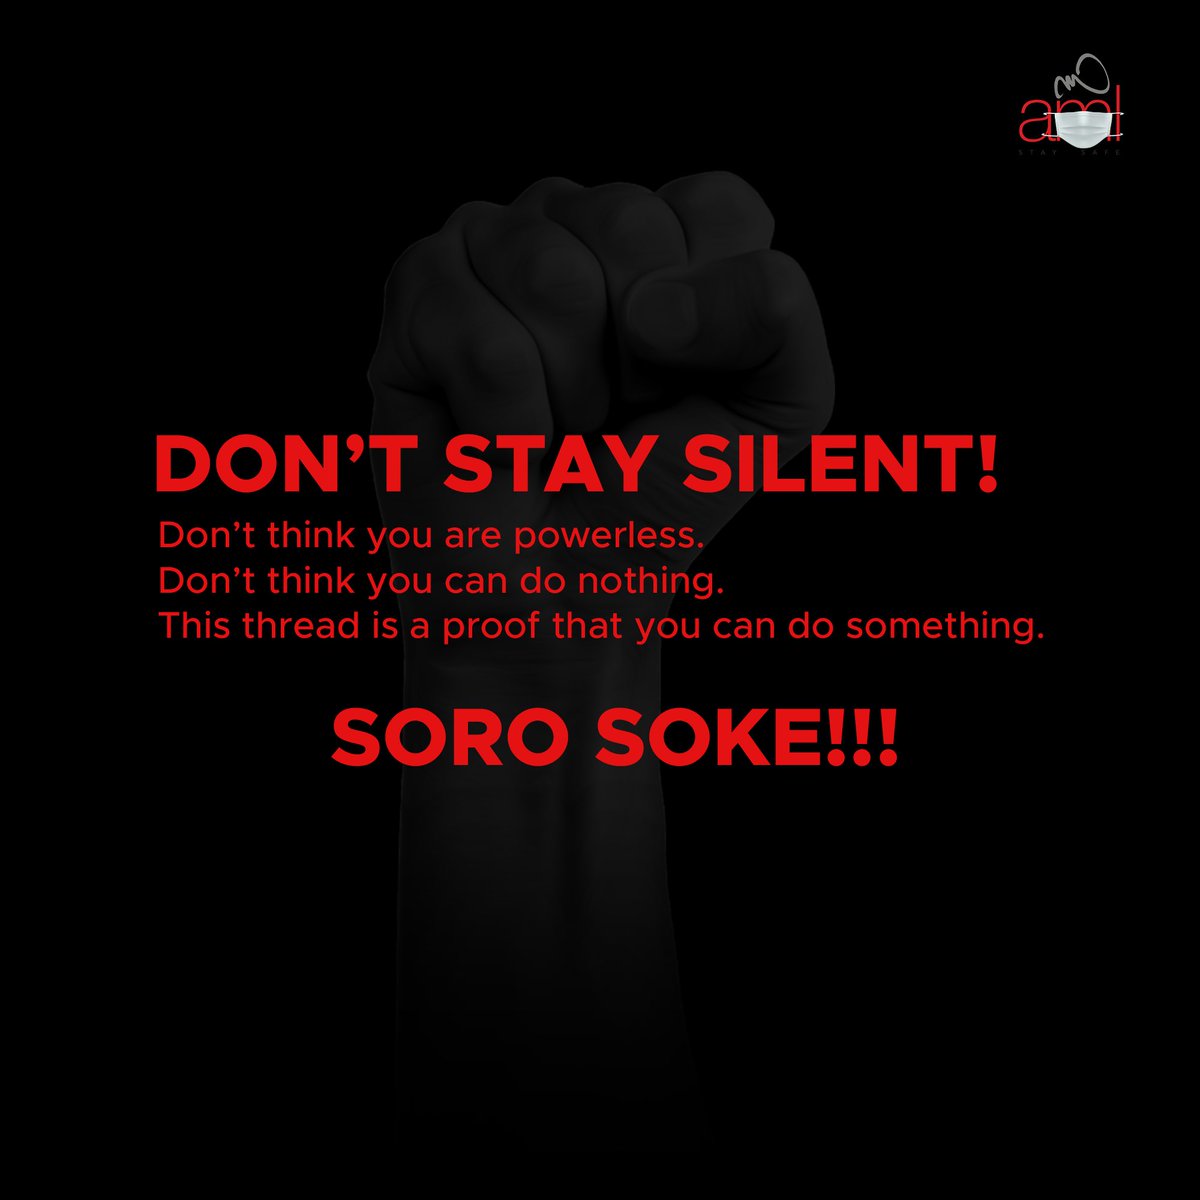 Don’t stay silent:Don’t think you are powerless,. Don’t think you can do nothing. This thread is a proof that you can do something. Soro soke!!!